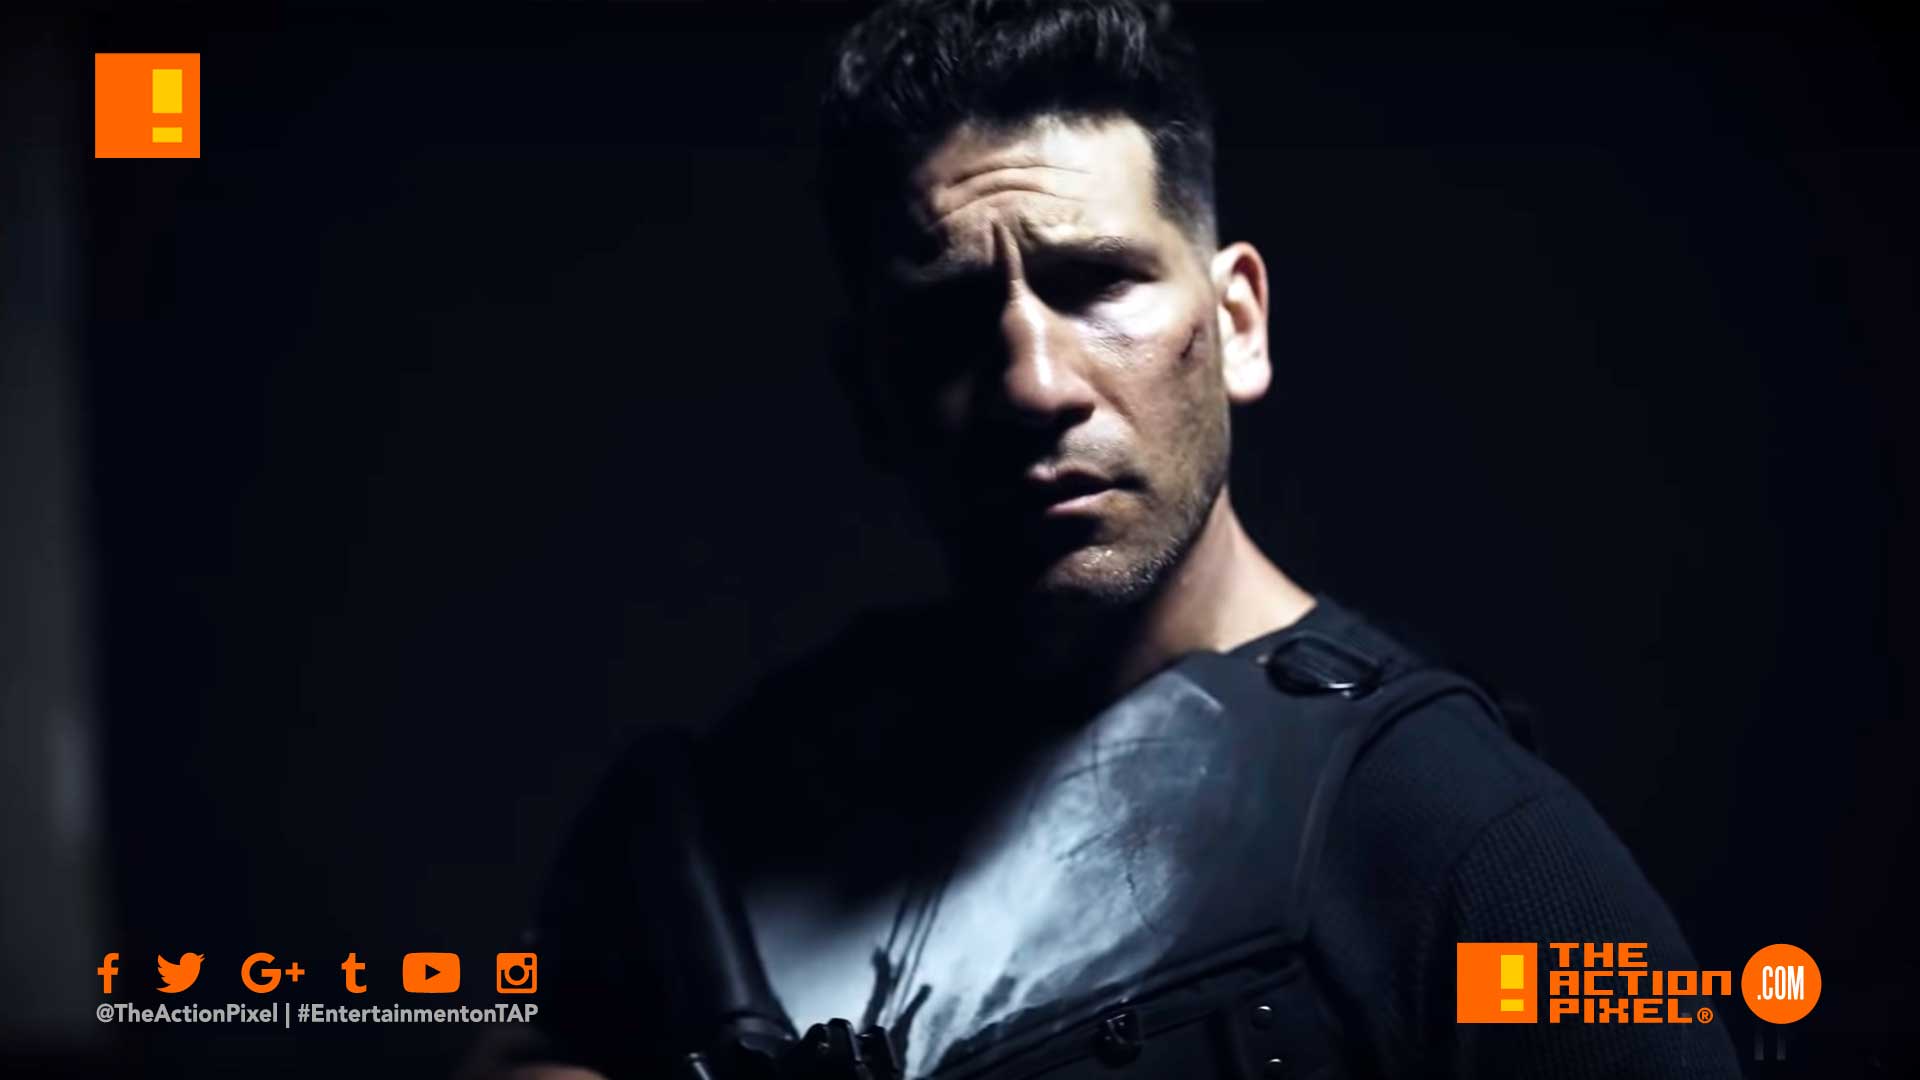 Jigsaw, the punisher, punisher 2, the punisher season 2, marvel, netflix, the action pixel, entertainment on tap, jon bernthal, release date, date announce, featured